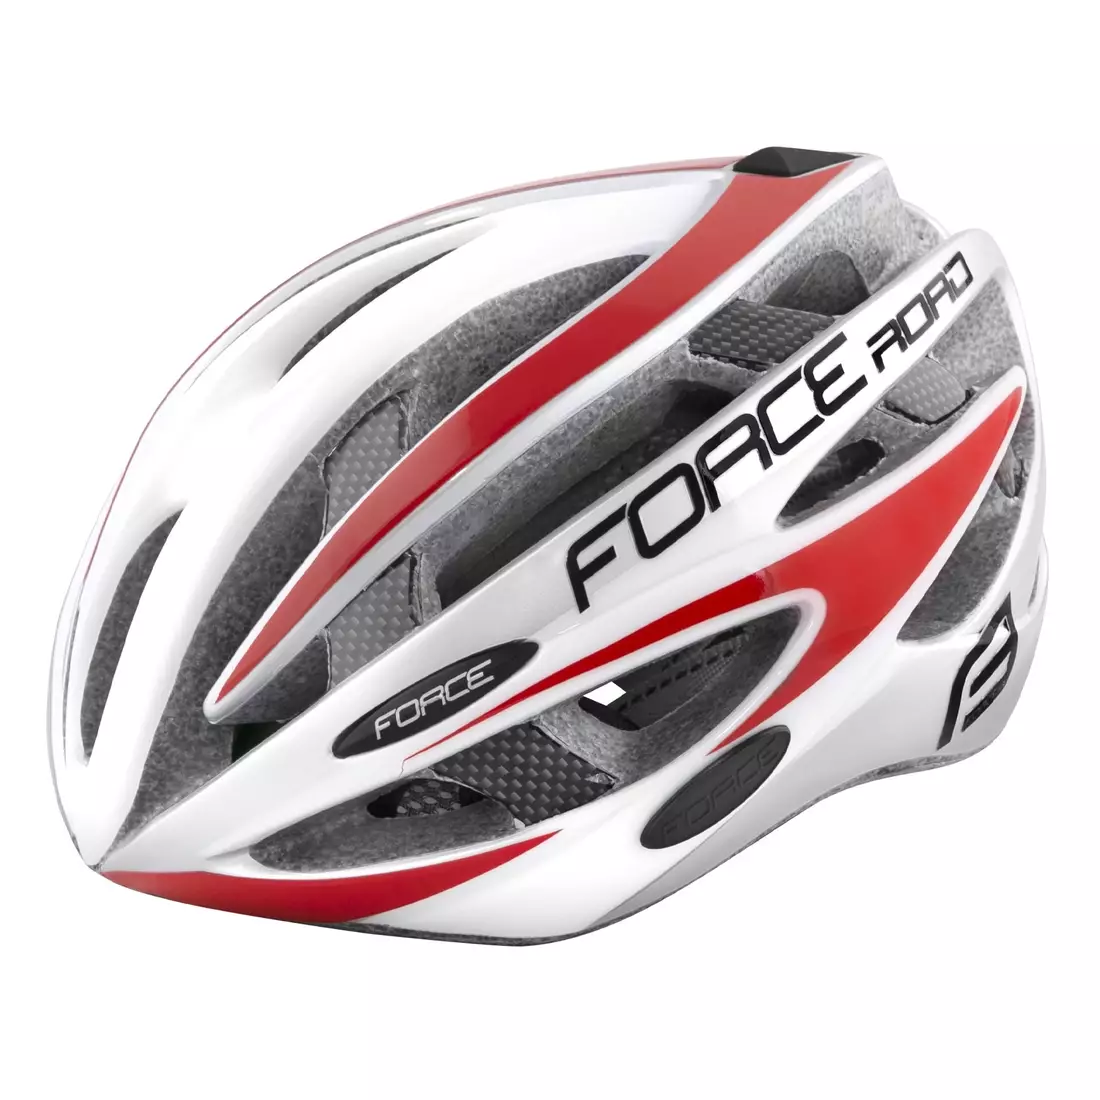 FORCE kask rowerowy ROAD white/red 9026191